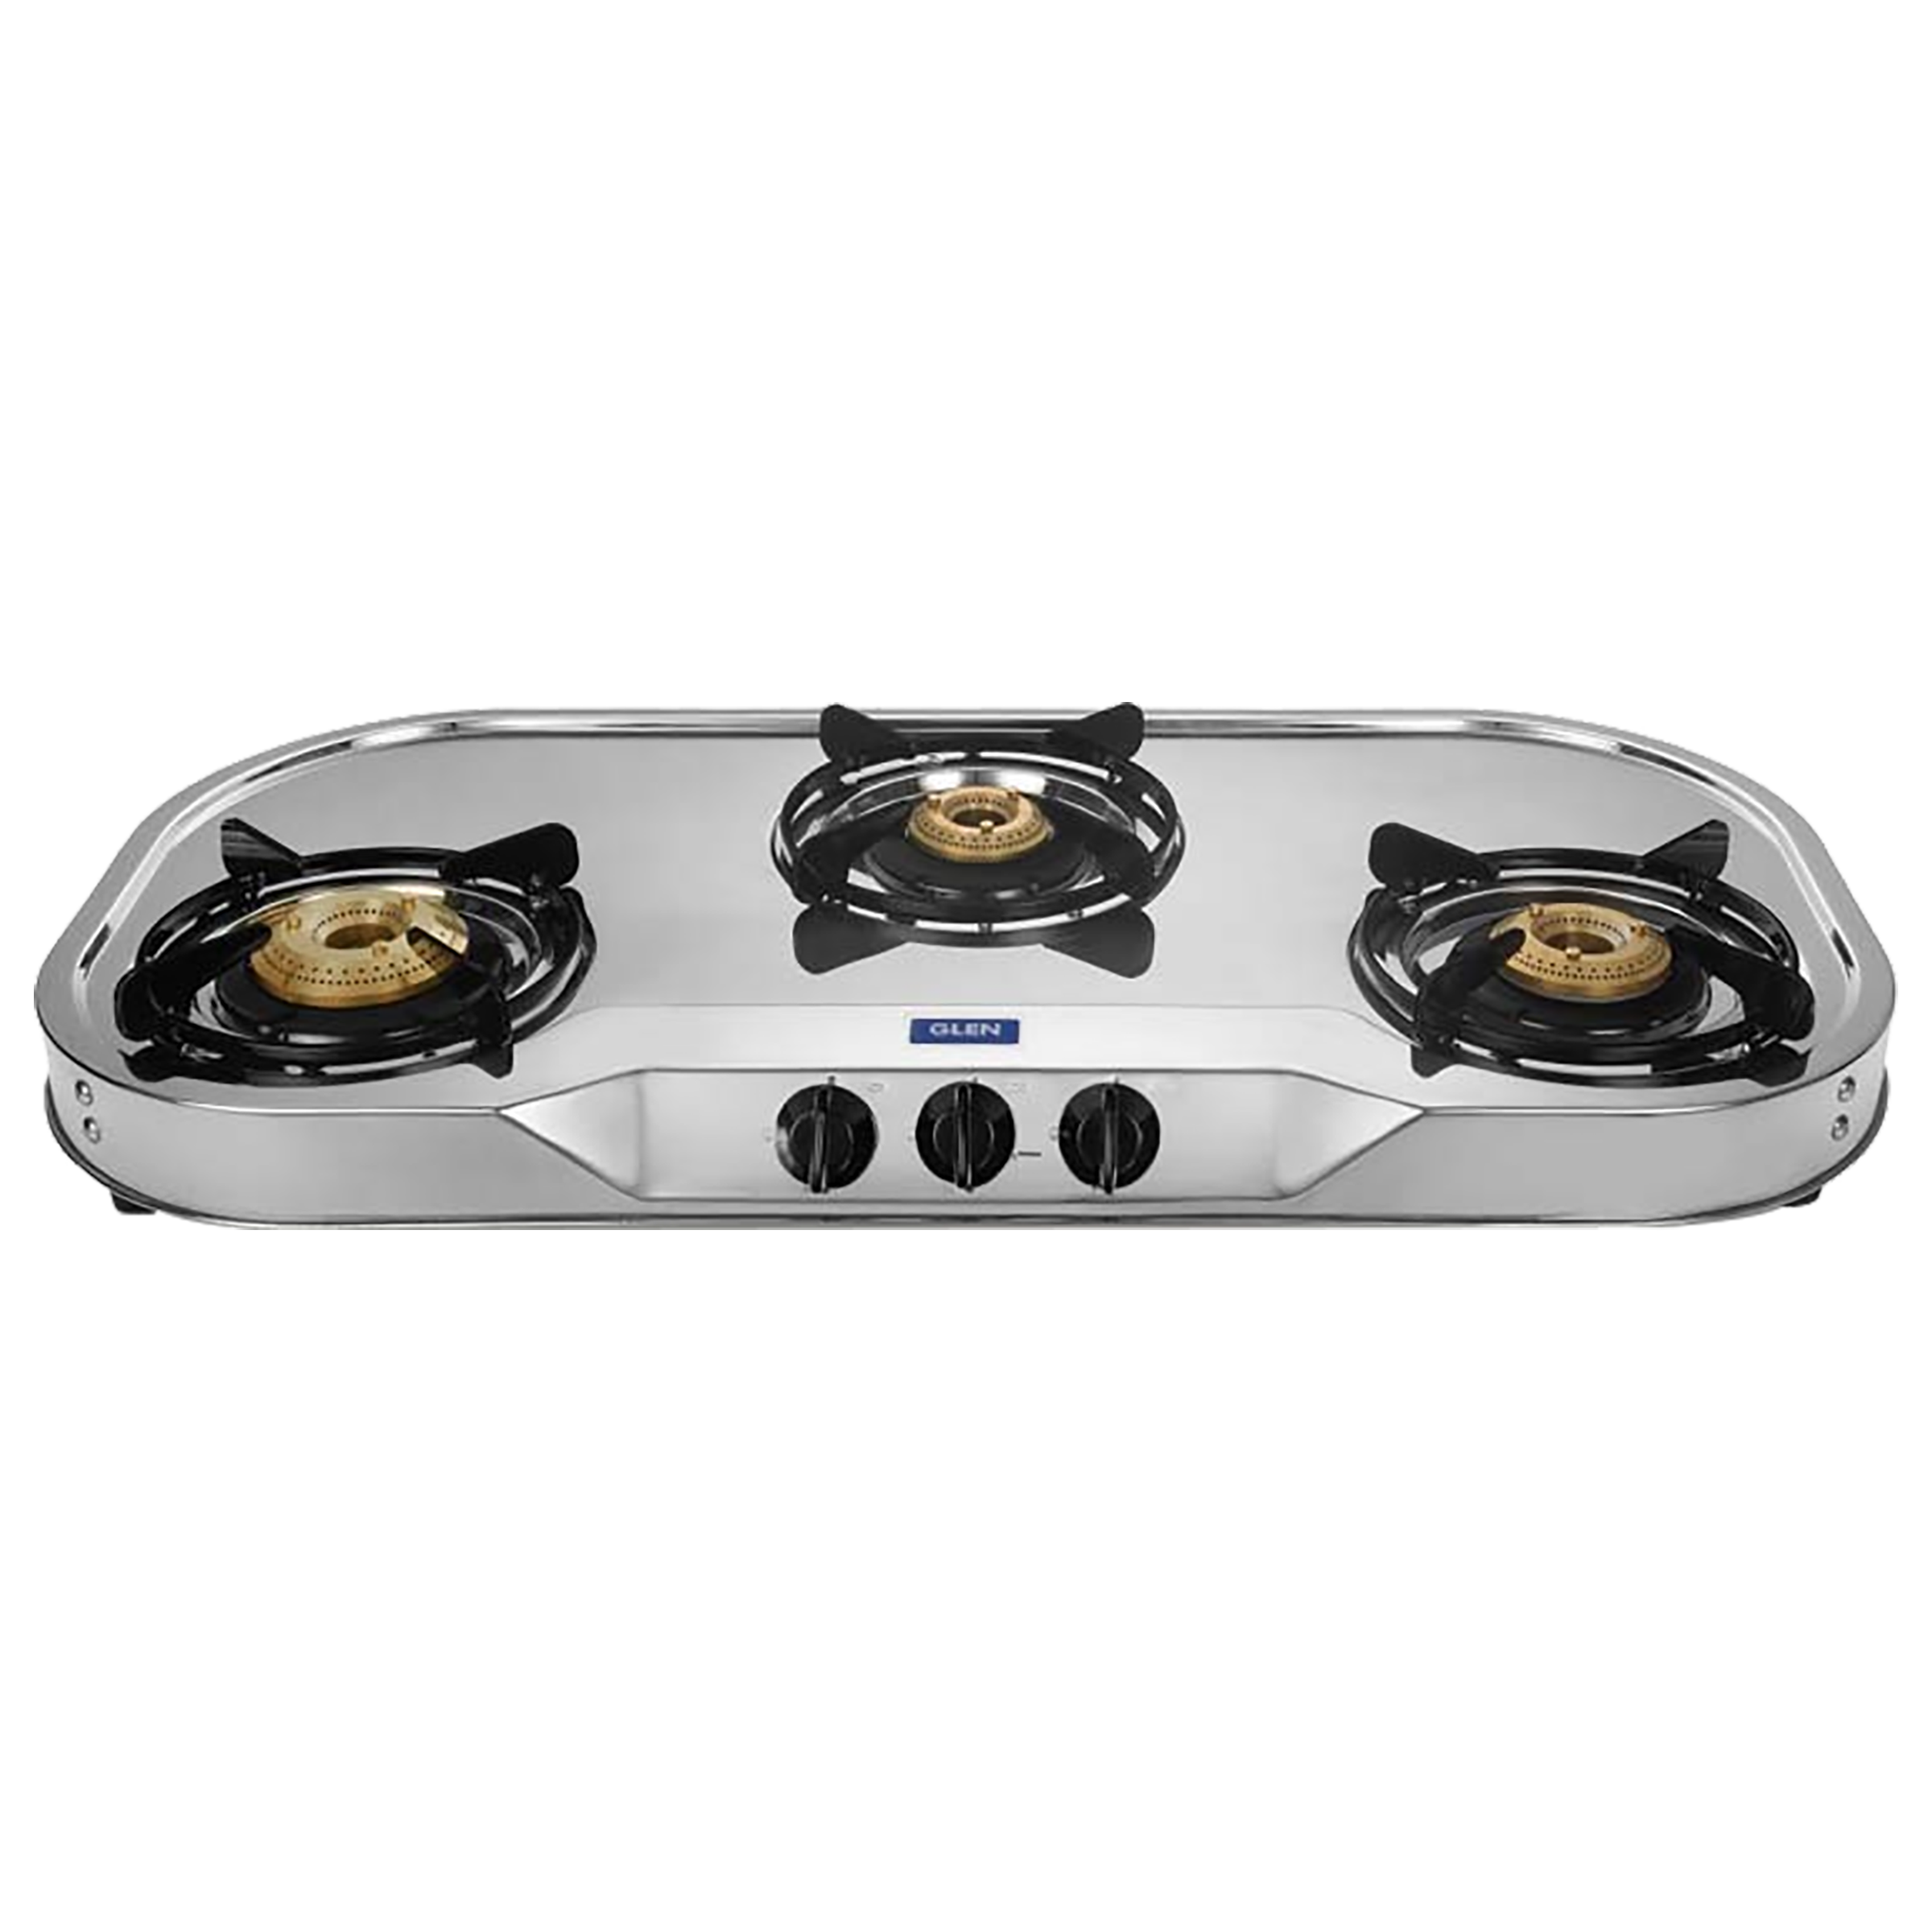 Glen CT1035XLHFBBDT 3 Burner Stainless Steel Gas Stove (Three Burner With Modern Soft Looks, Silver)_1